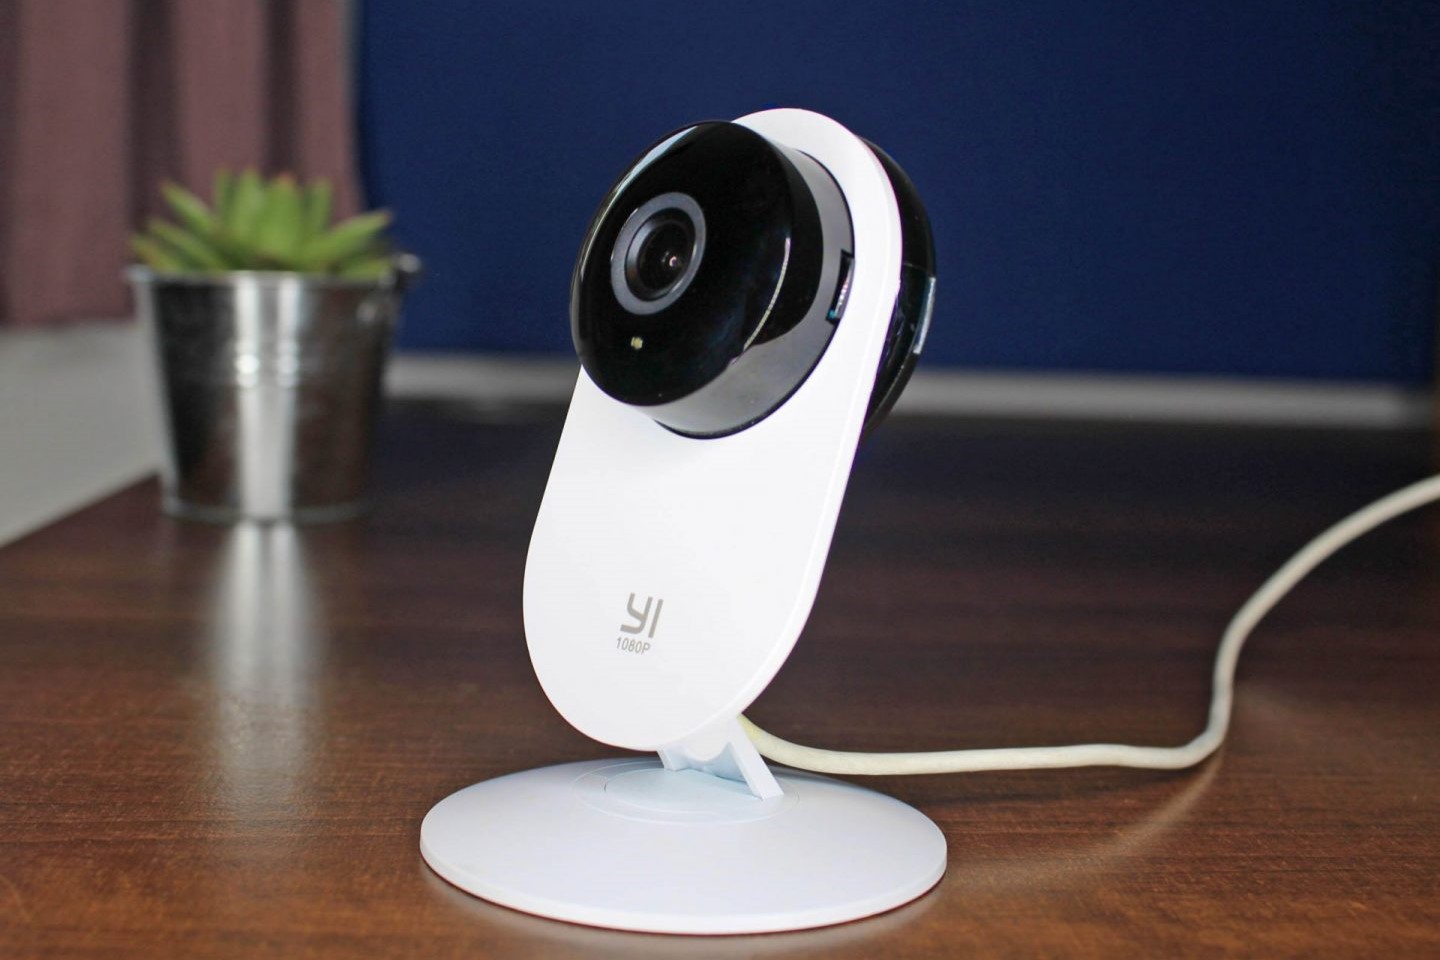 Diagnosing And Fixing Issues With Xiaomi Yi Security Camera